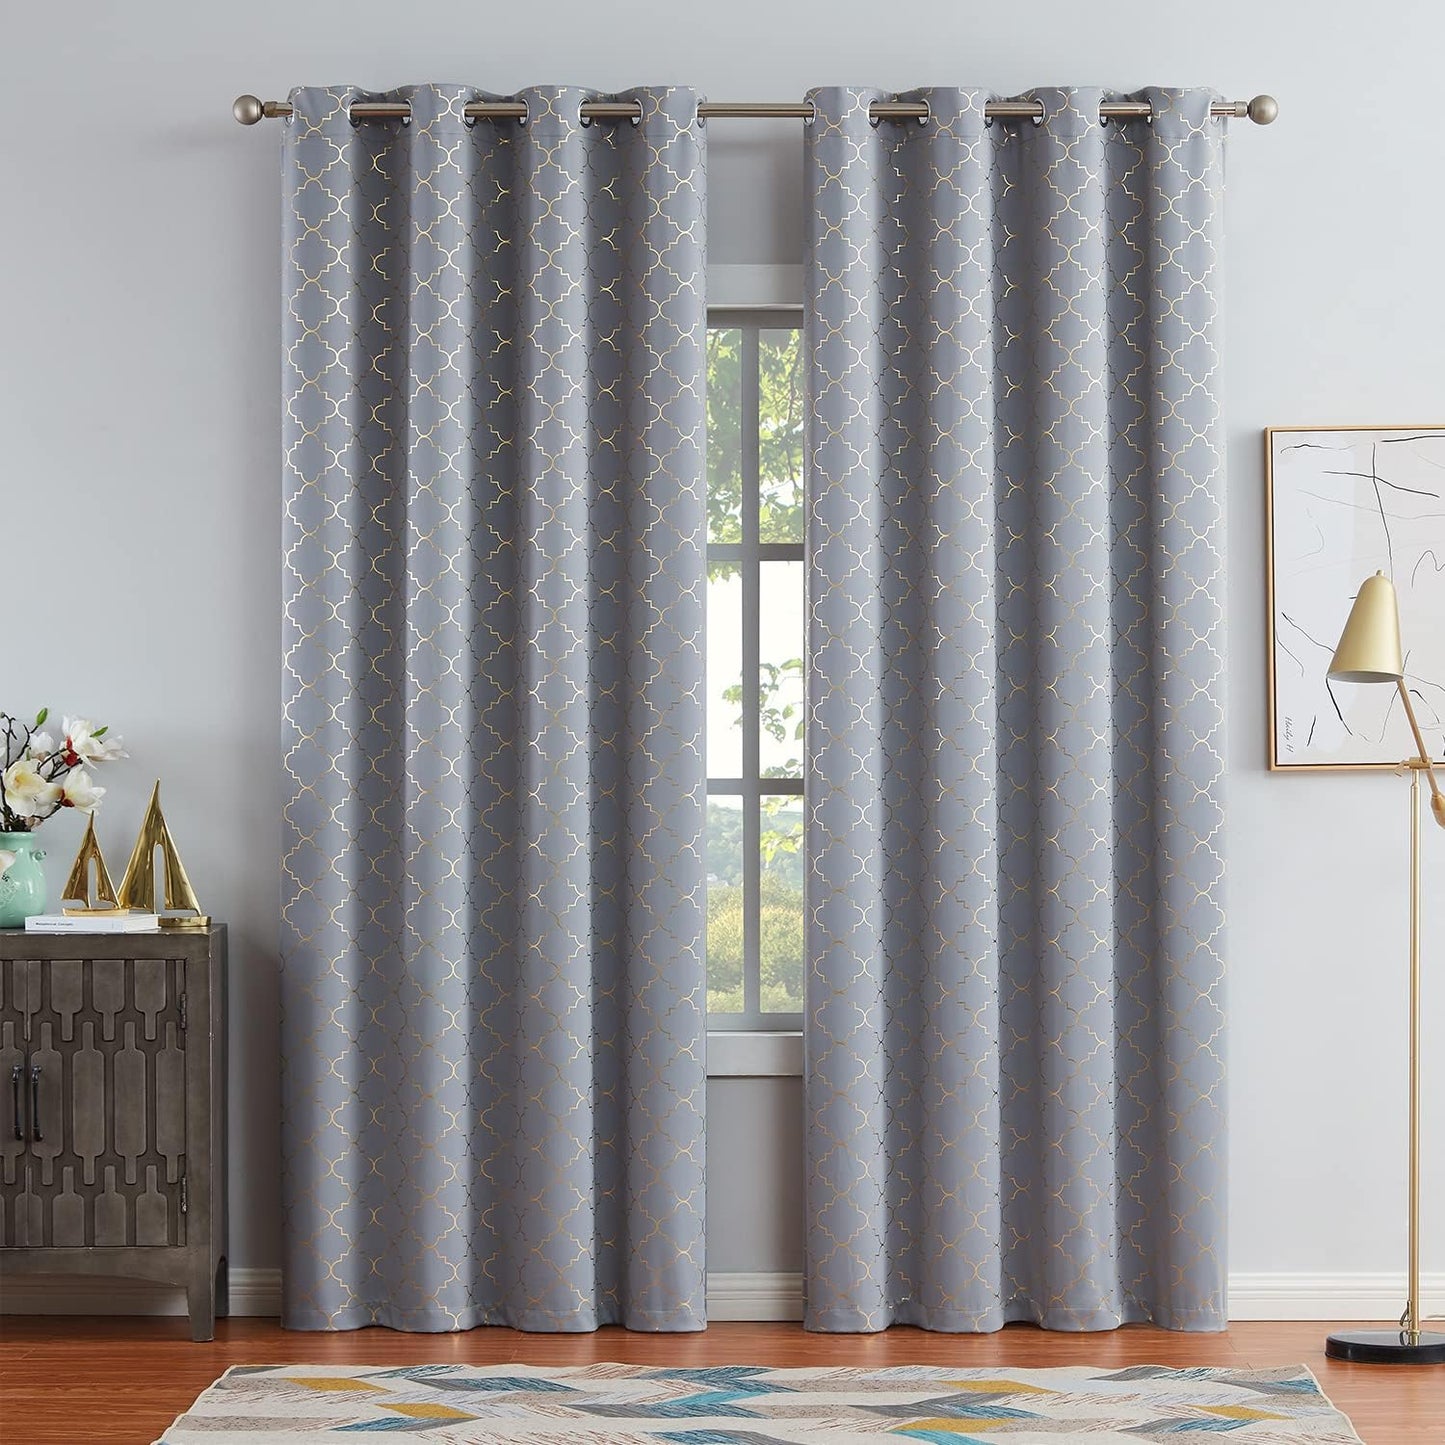 Enactex 100% Full Blackout Curtains 63 Inch Length Thermal Insulated Grey Curtain with Gold Geometric Metallic Pattern, Light Blocking Grommet Window Drapes for Living Room Bedroom, 2 Panels  Enactex   